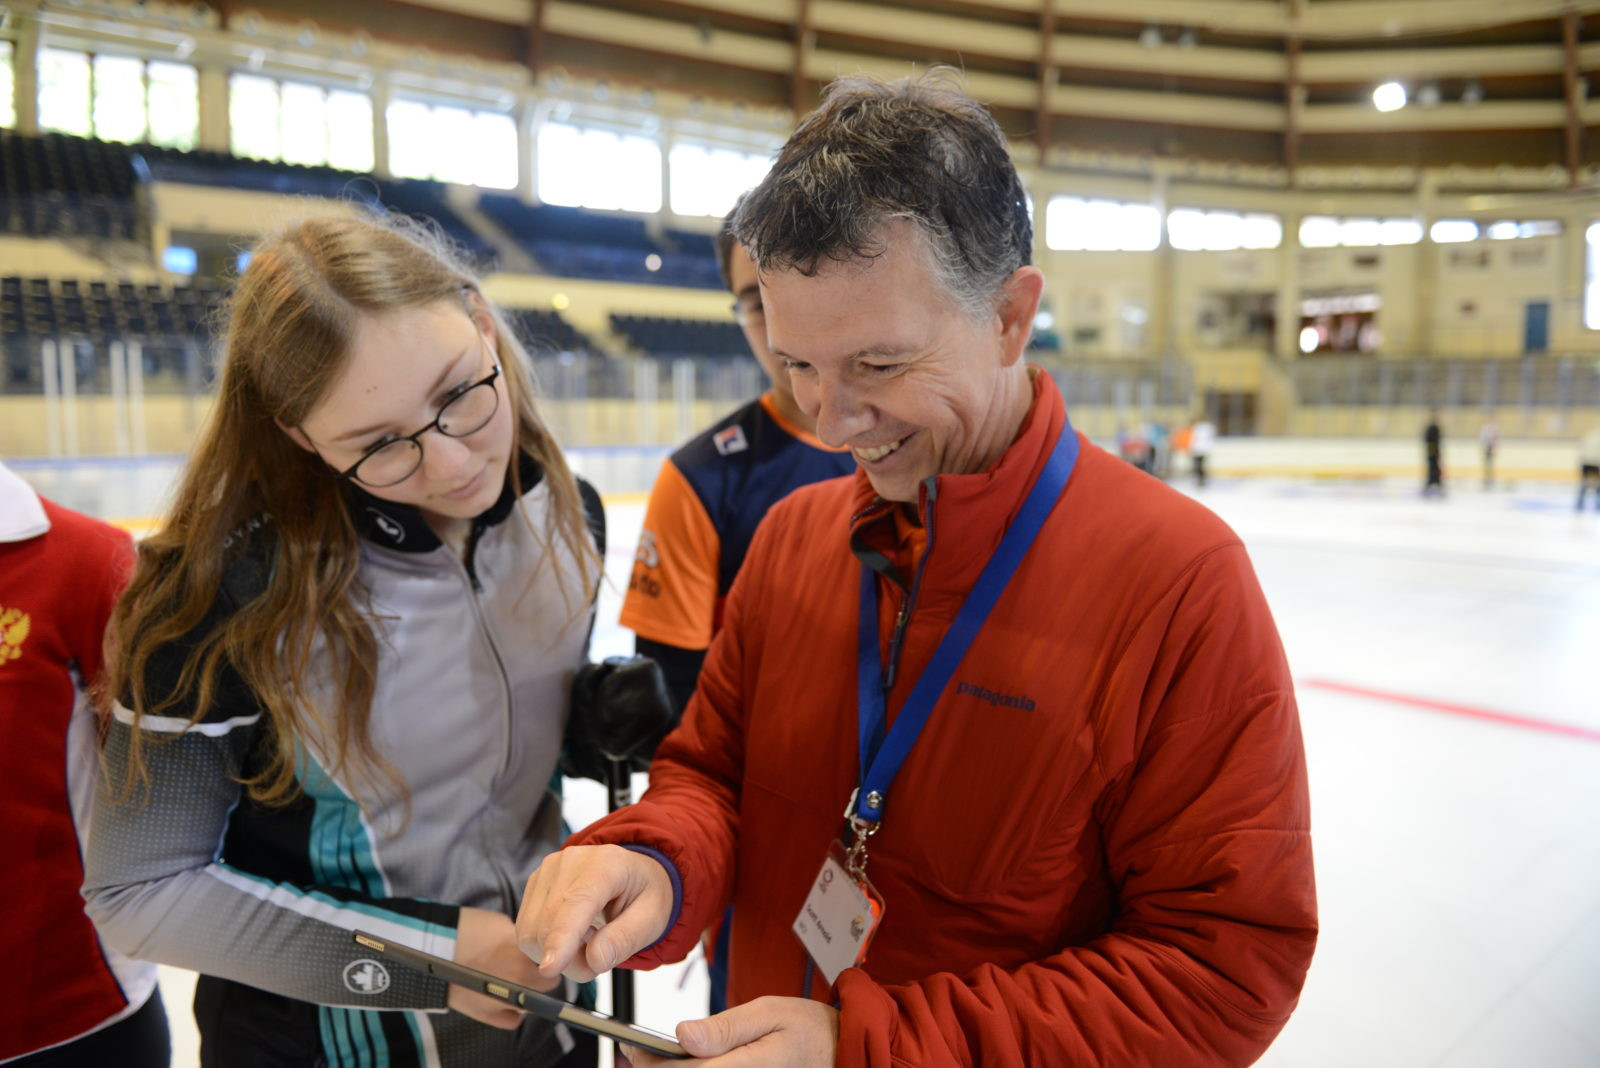 WCF head of development Scott Arnold has revealed his delight at the launch of the World Curling Academy's first online course aimed at teaching a basic knowledge of maintaining curling ice ©WCF